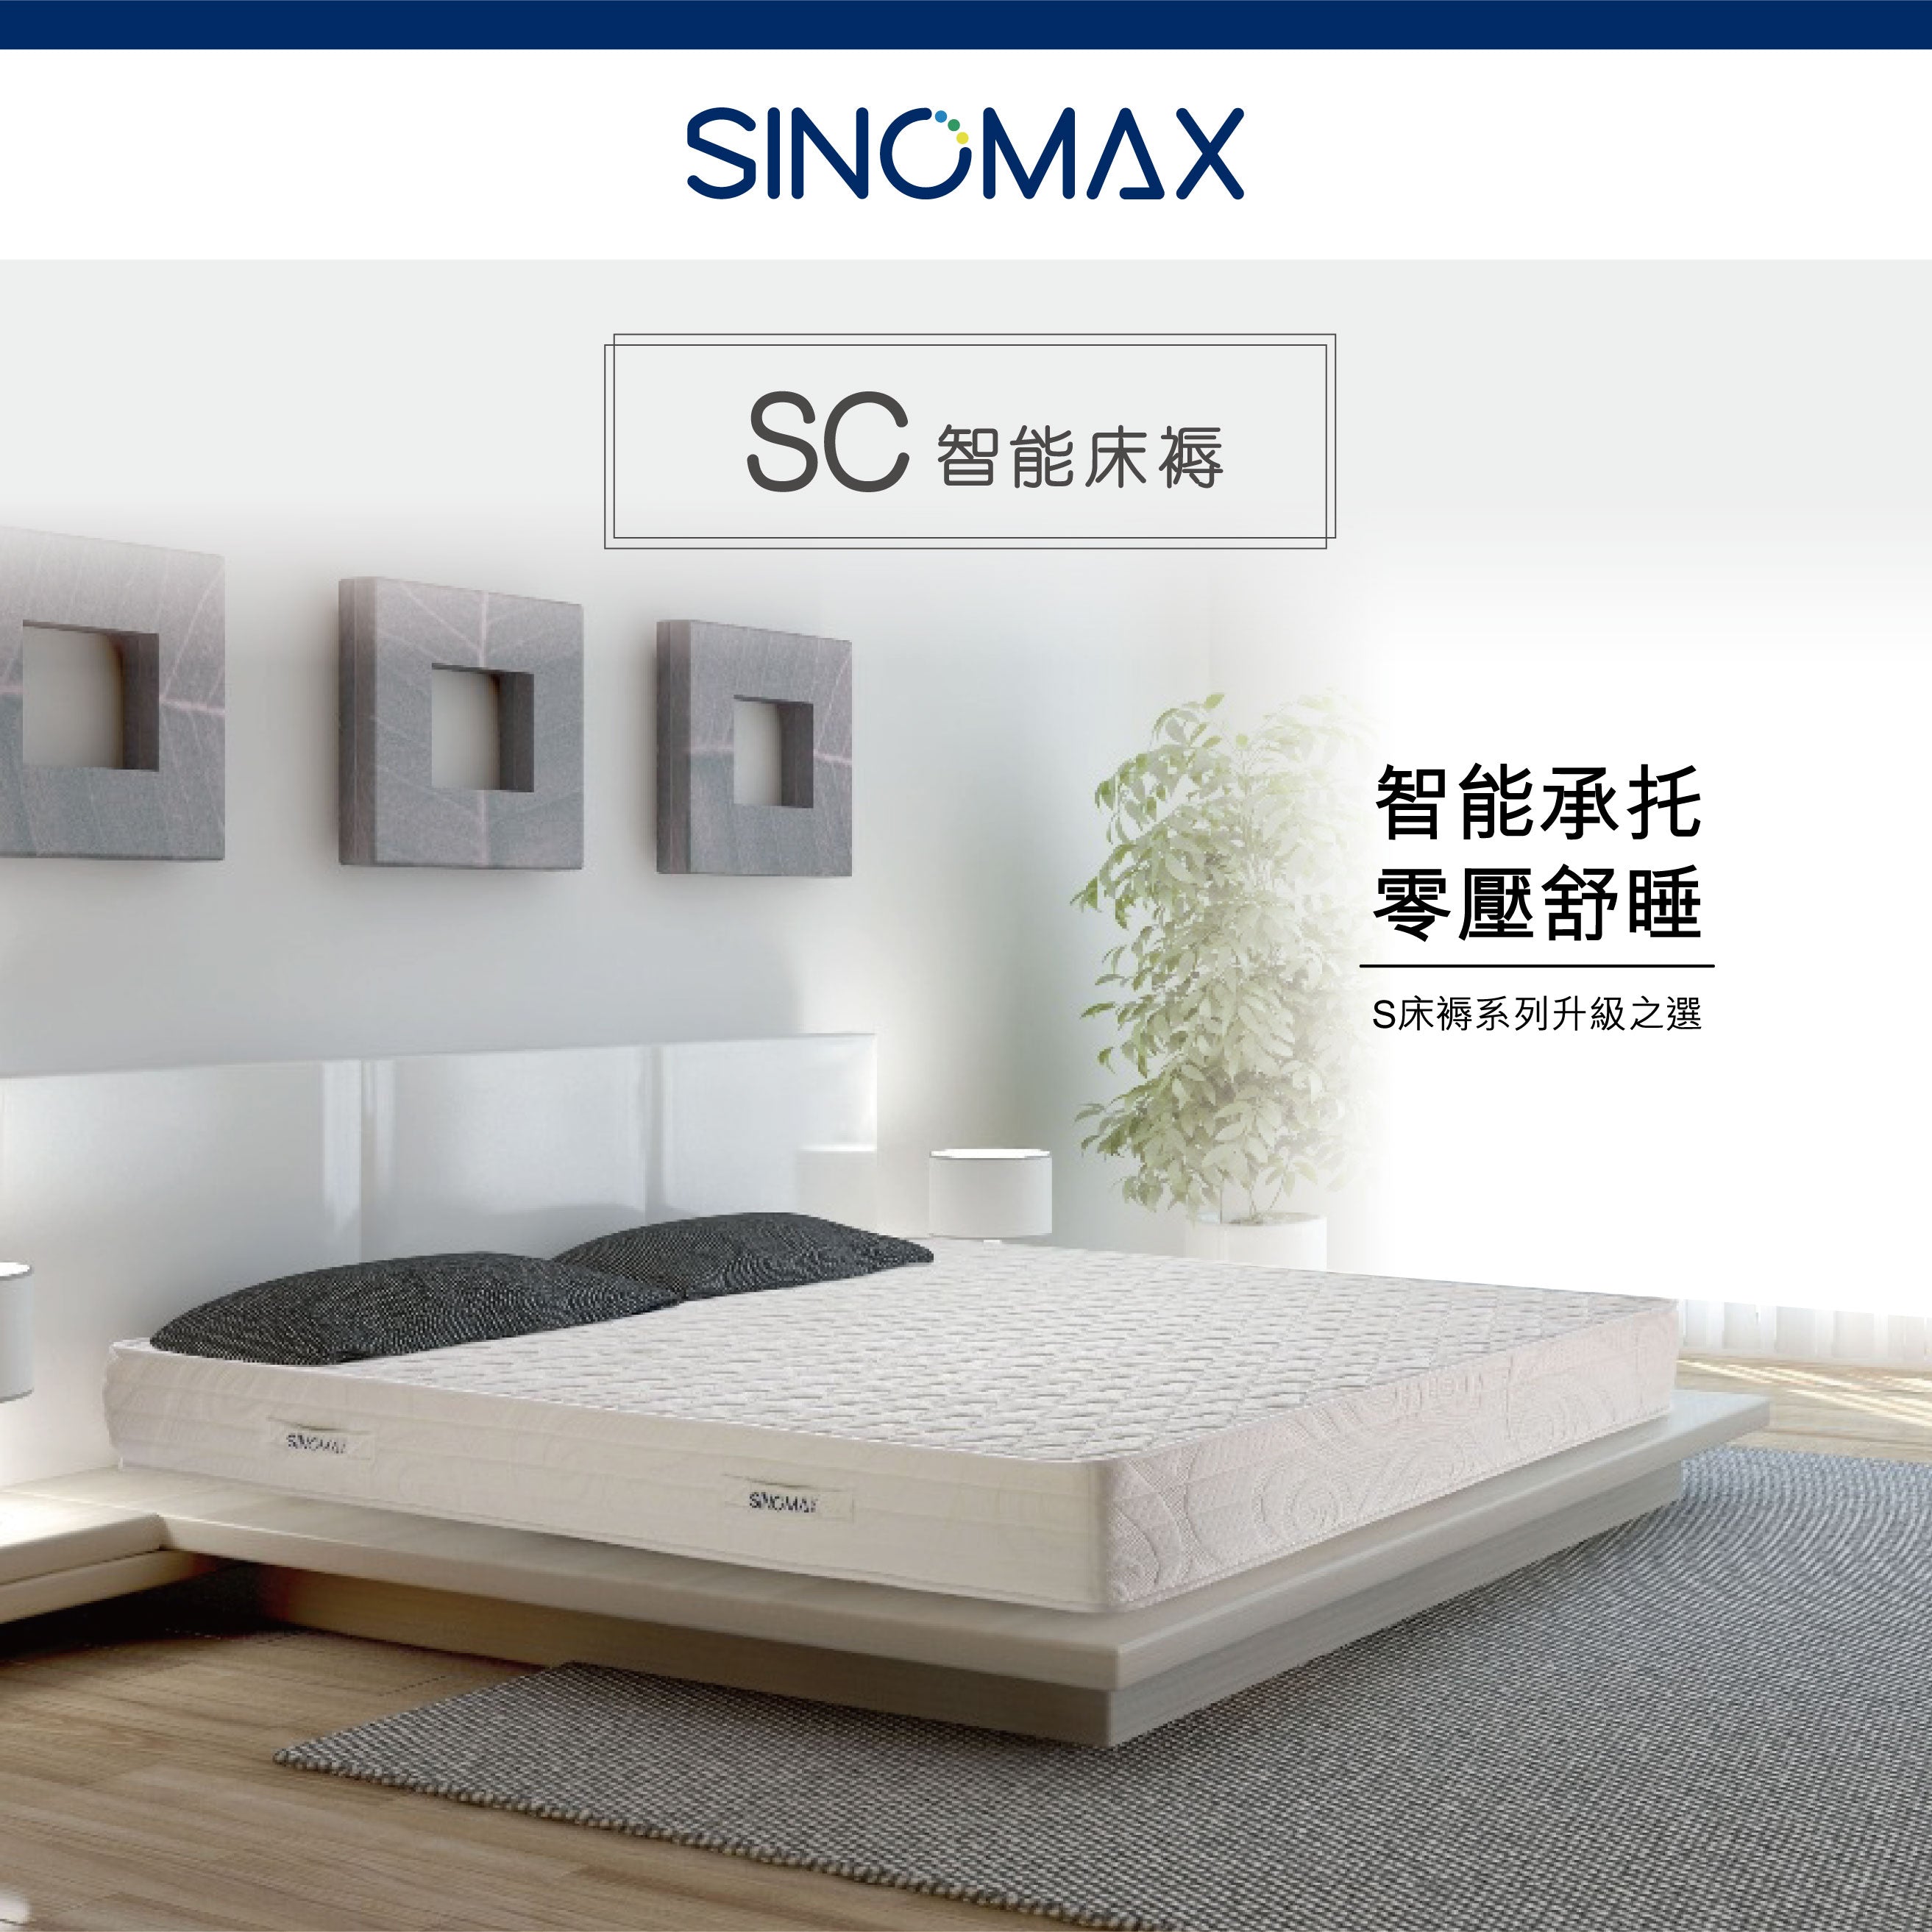 SC xMattress- Tailor-made size (Above 48" W)